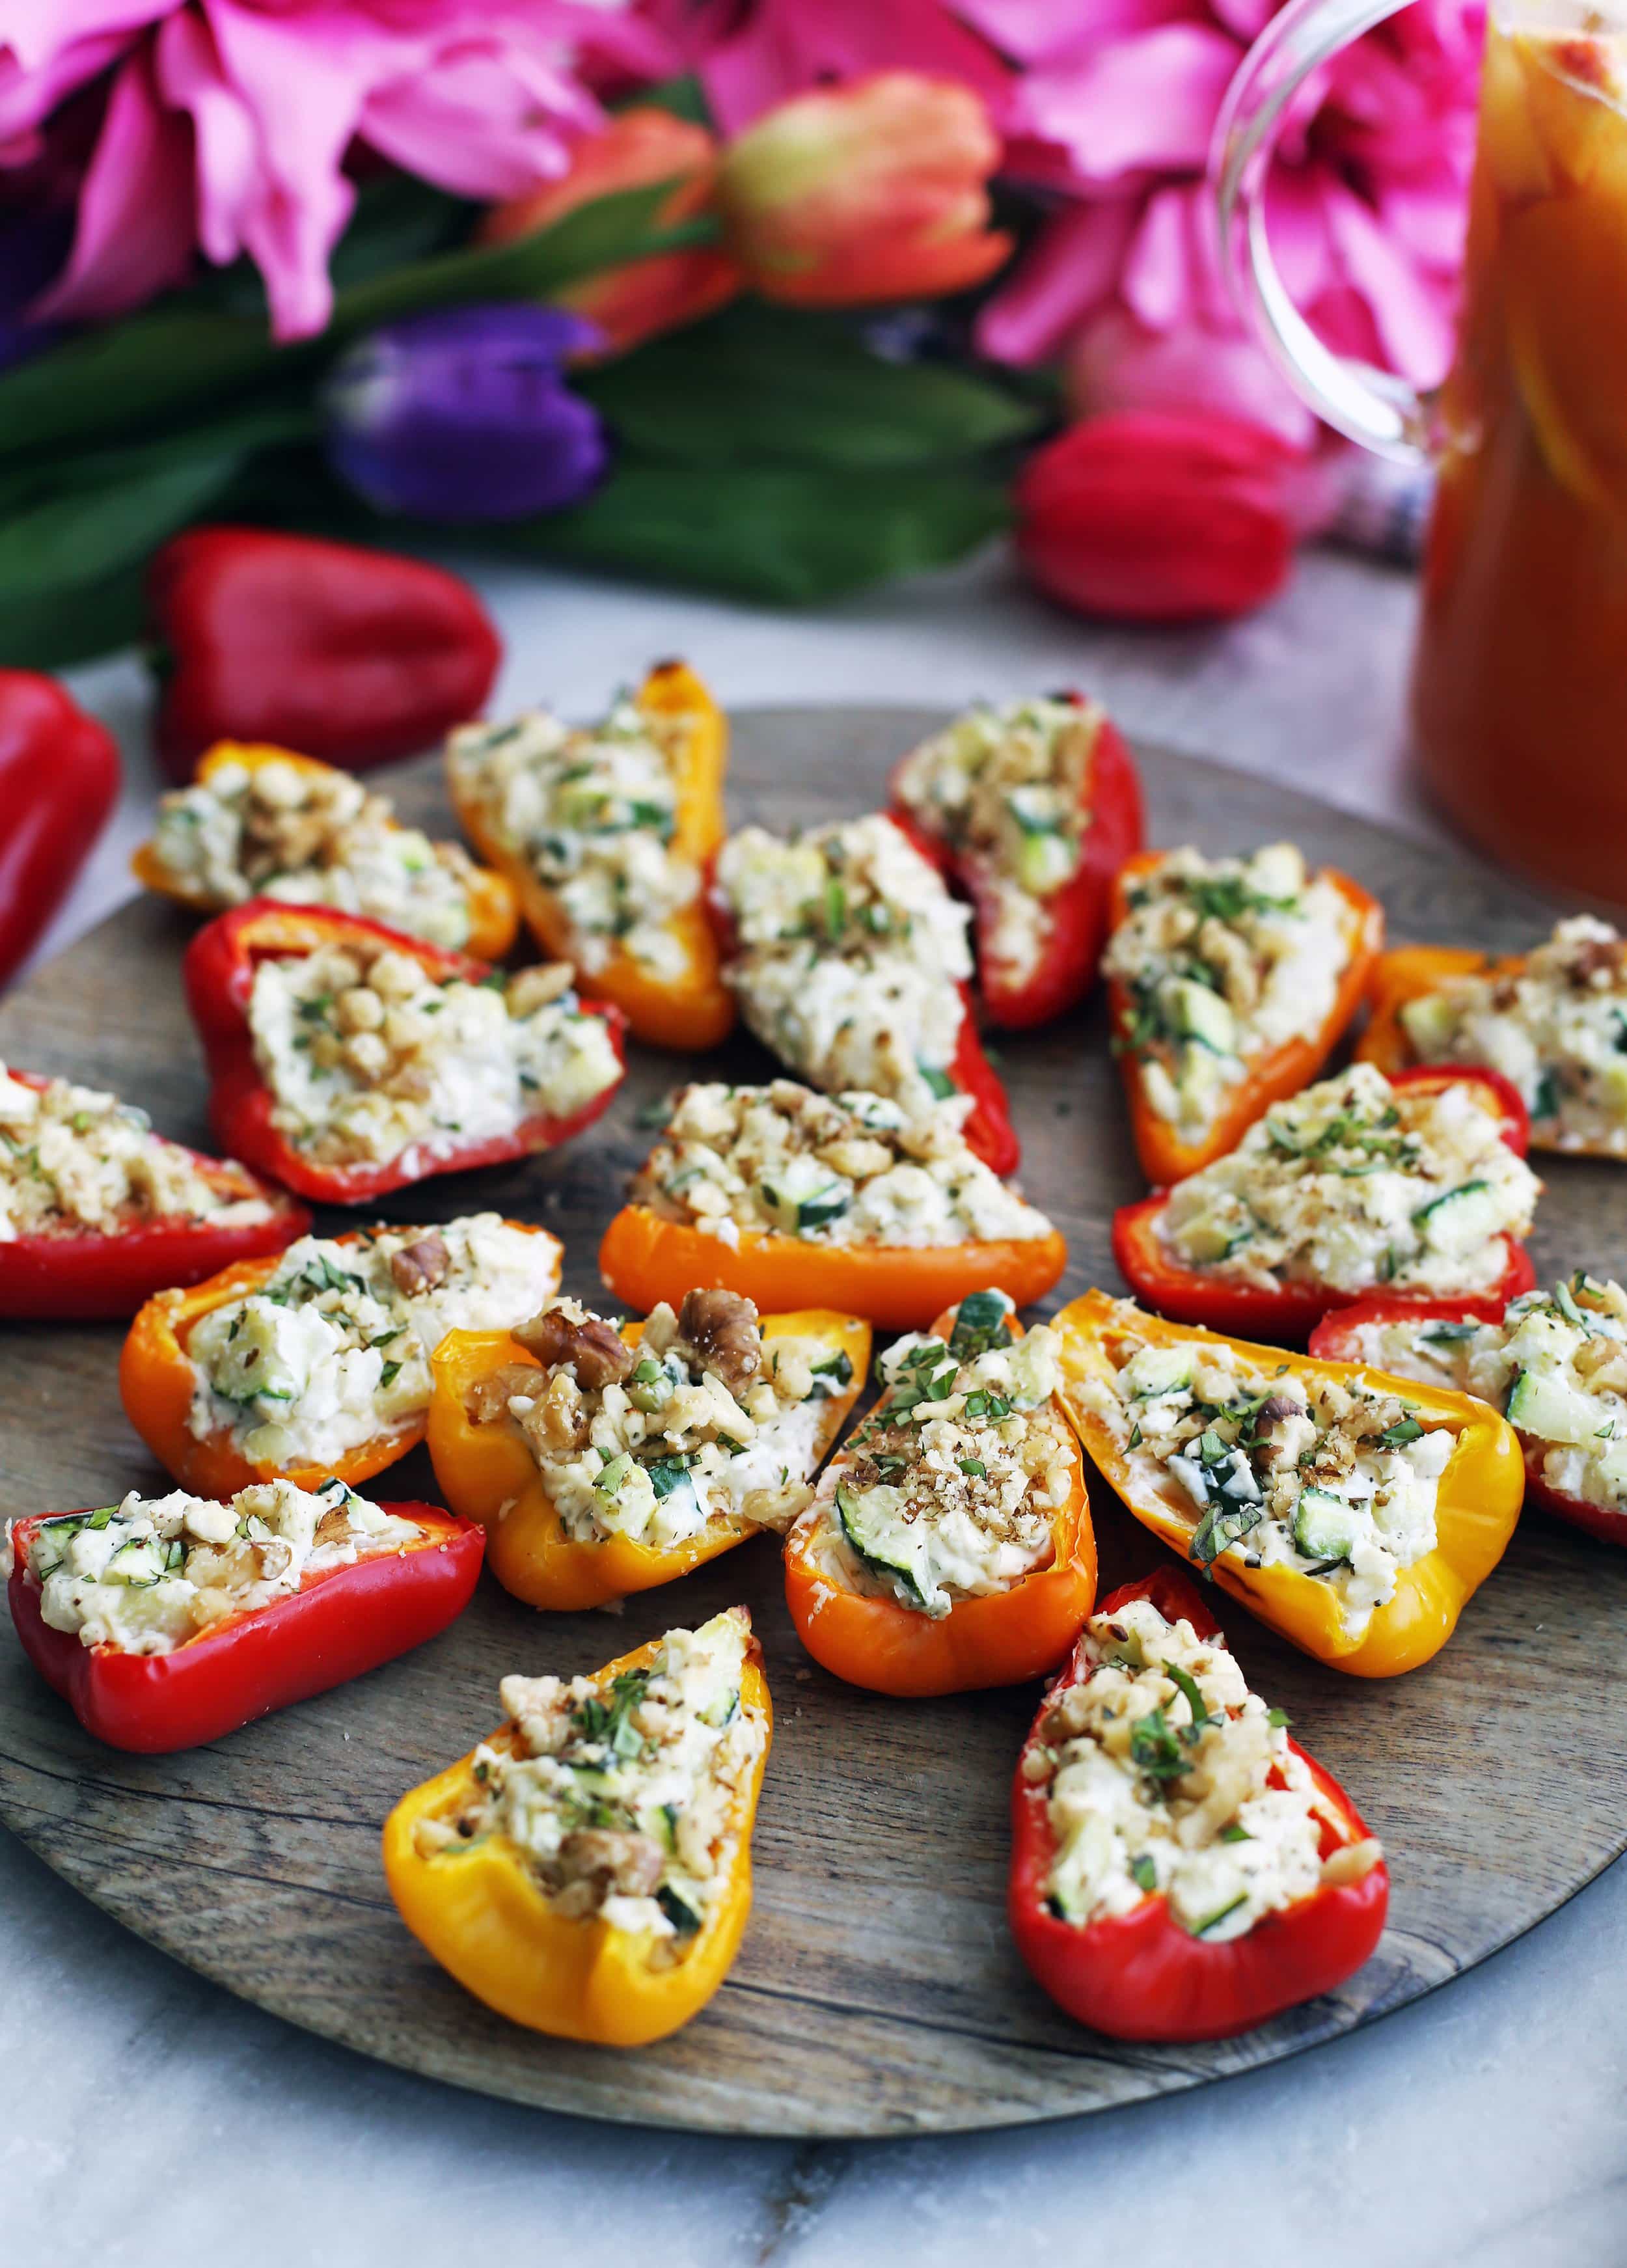 Baked mini bell peppers halves filled with a zucchini, onion, and cream cheese filling on a round wooden platter.